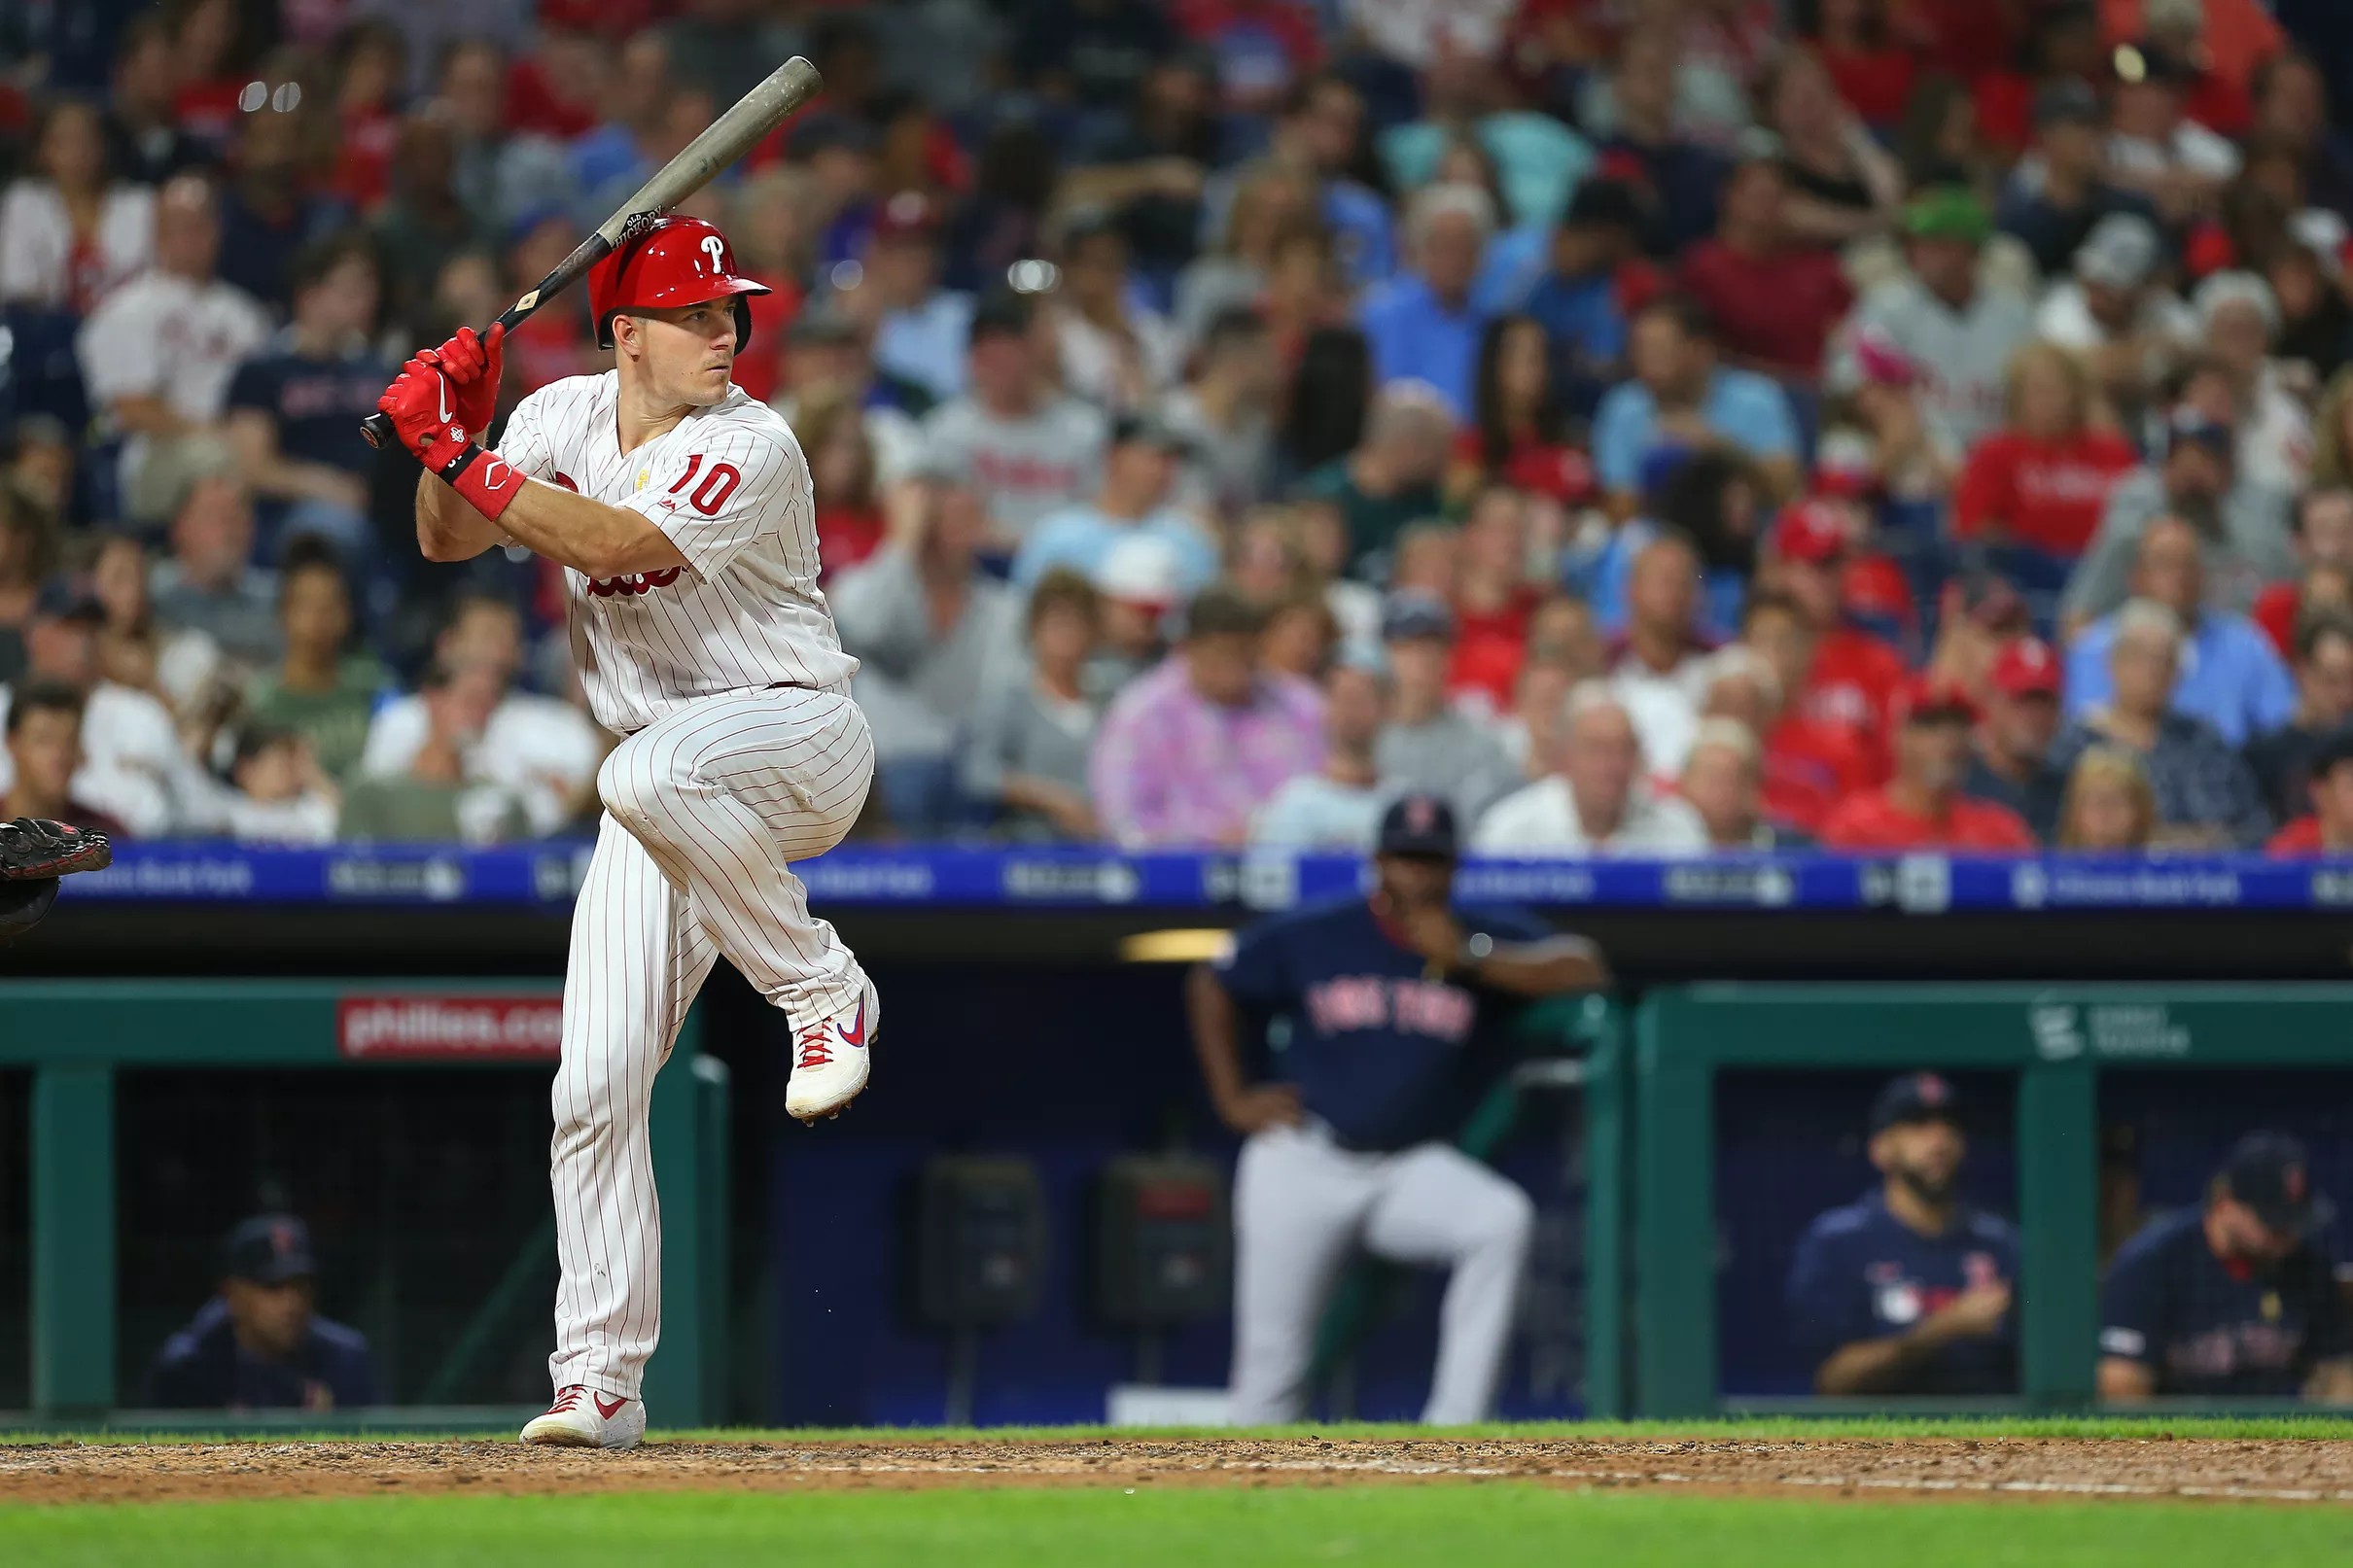 Let’s talk about that J.T. Realmuto article